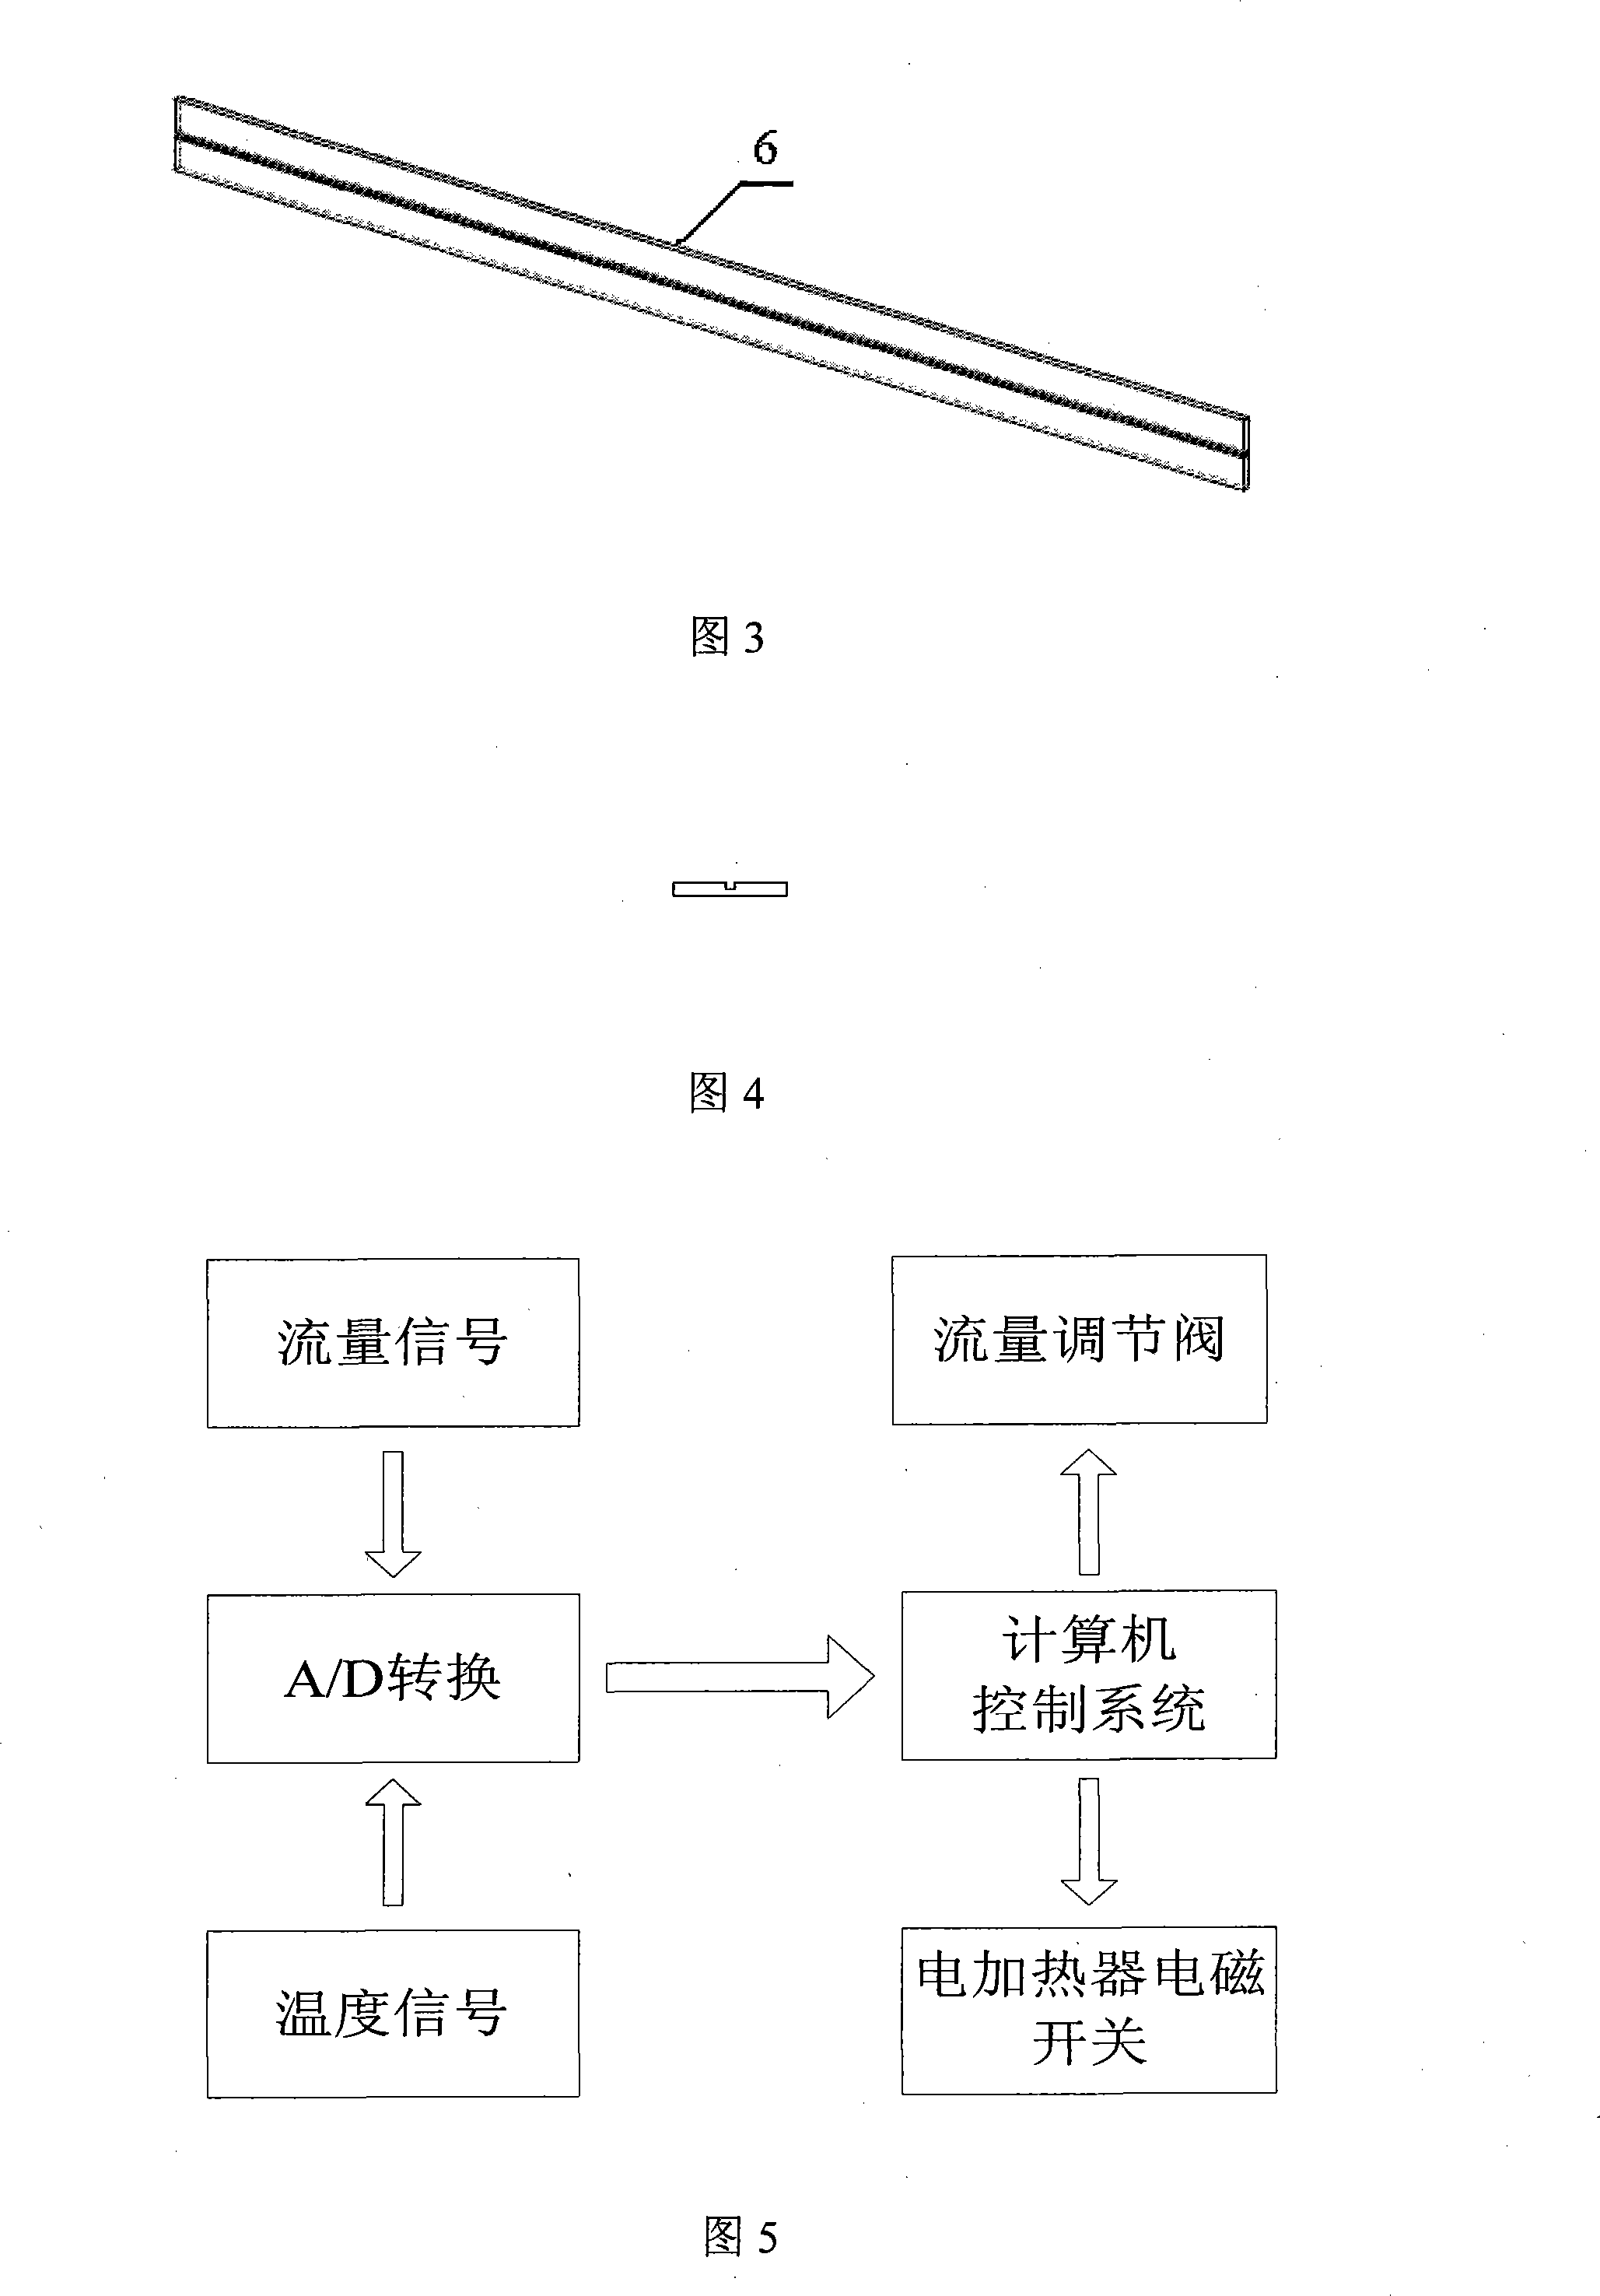 Method and device for measuring anti-dirty performance of material surface based on weight method